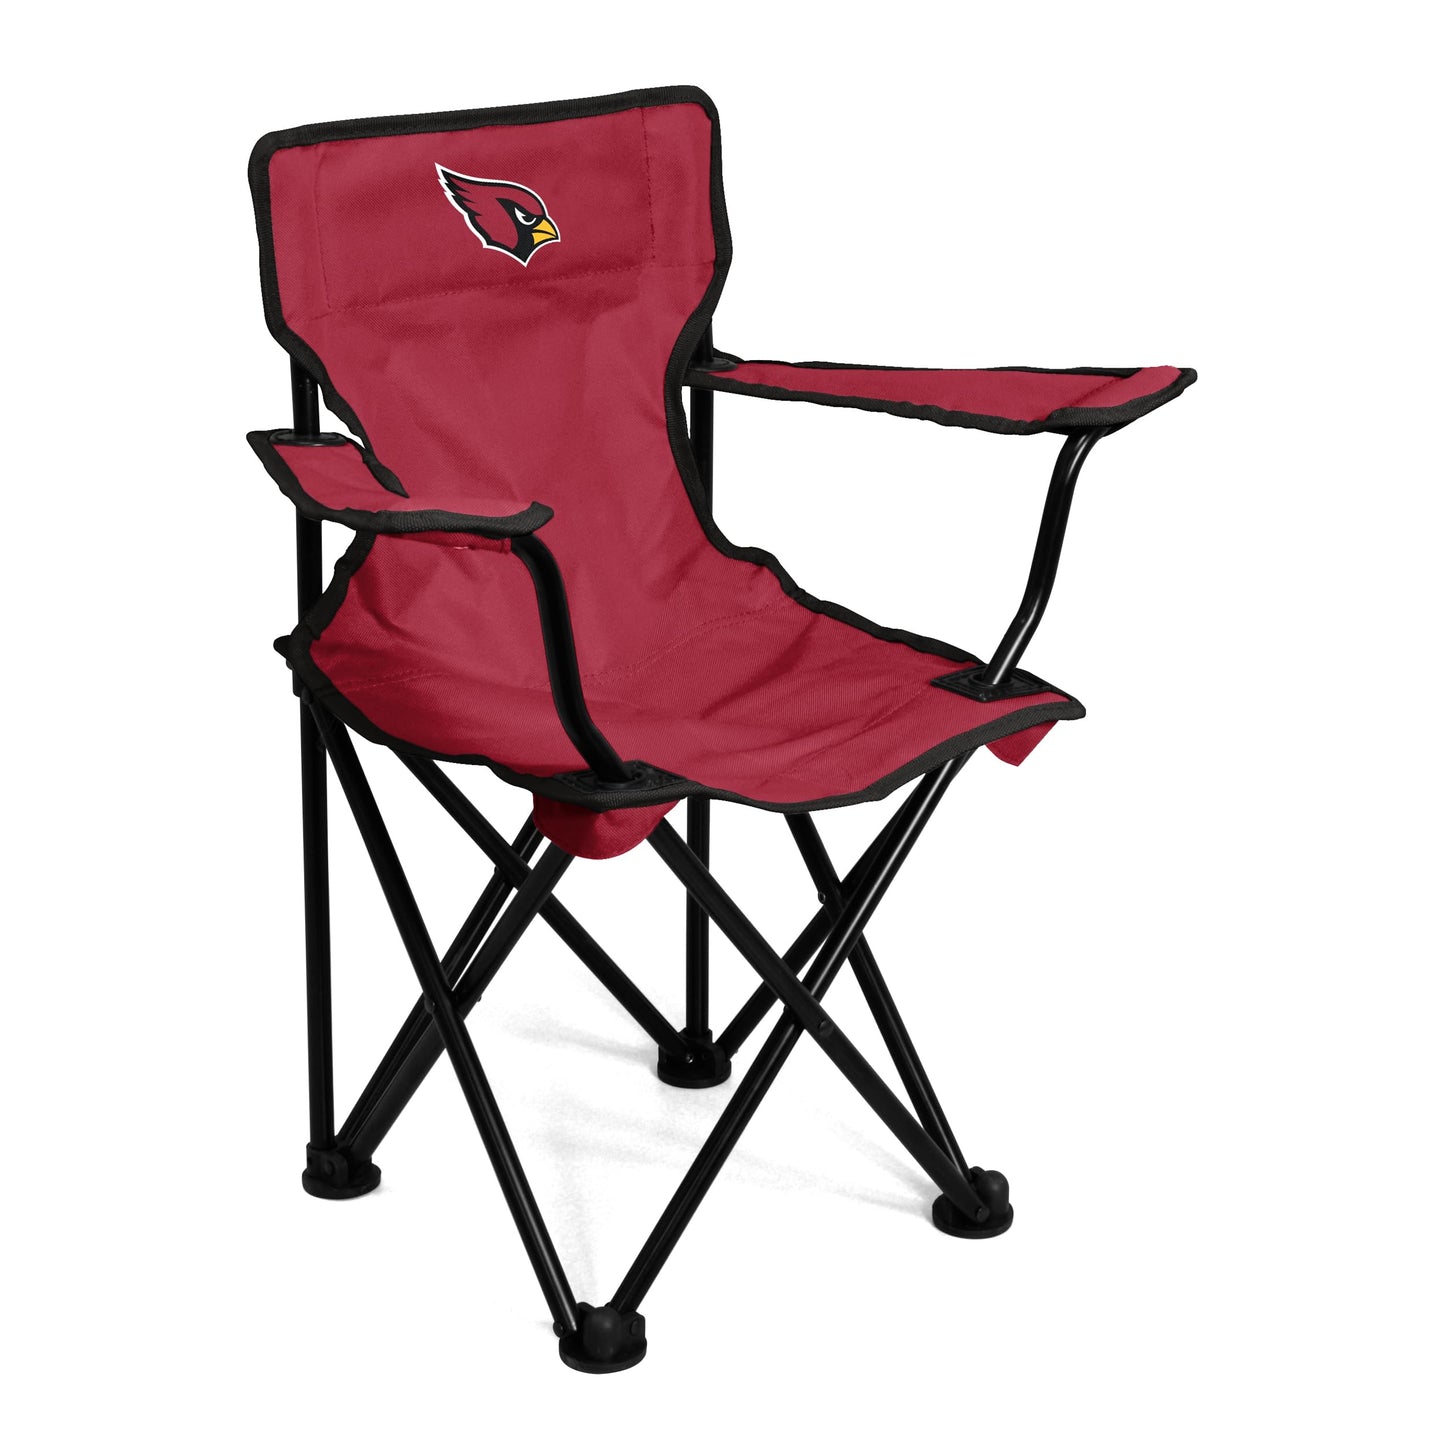 logobrands New Orleans Saints Toddler Tailgate Chair